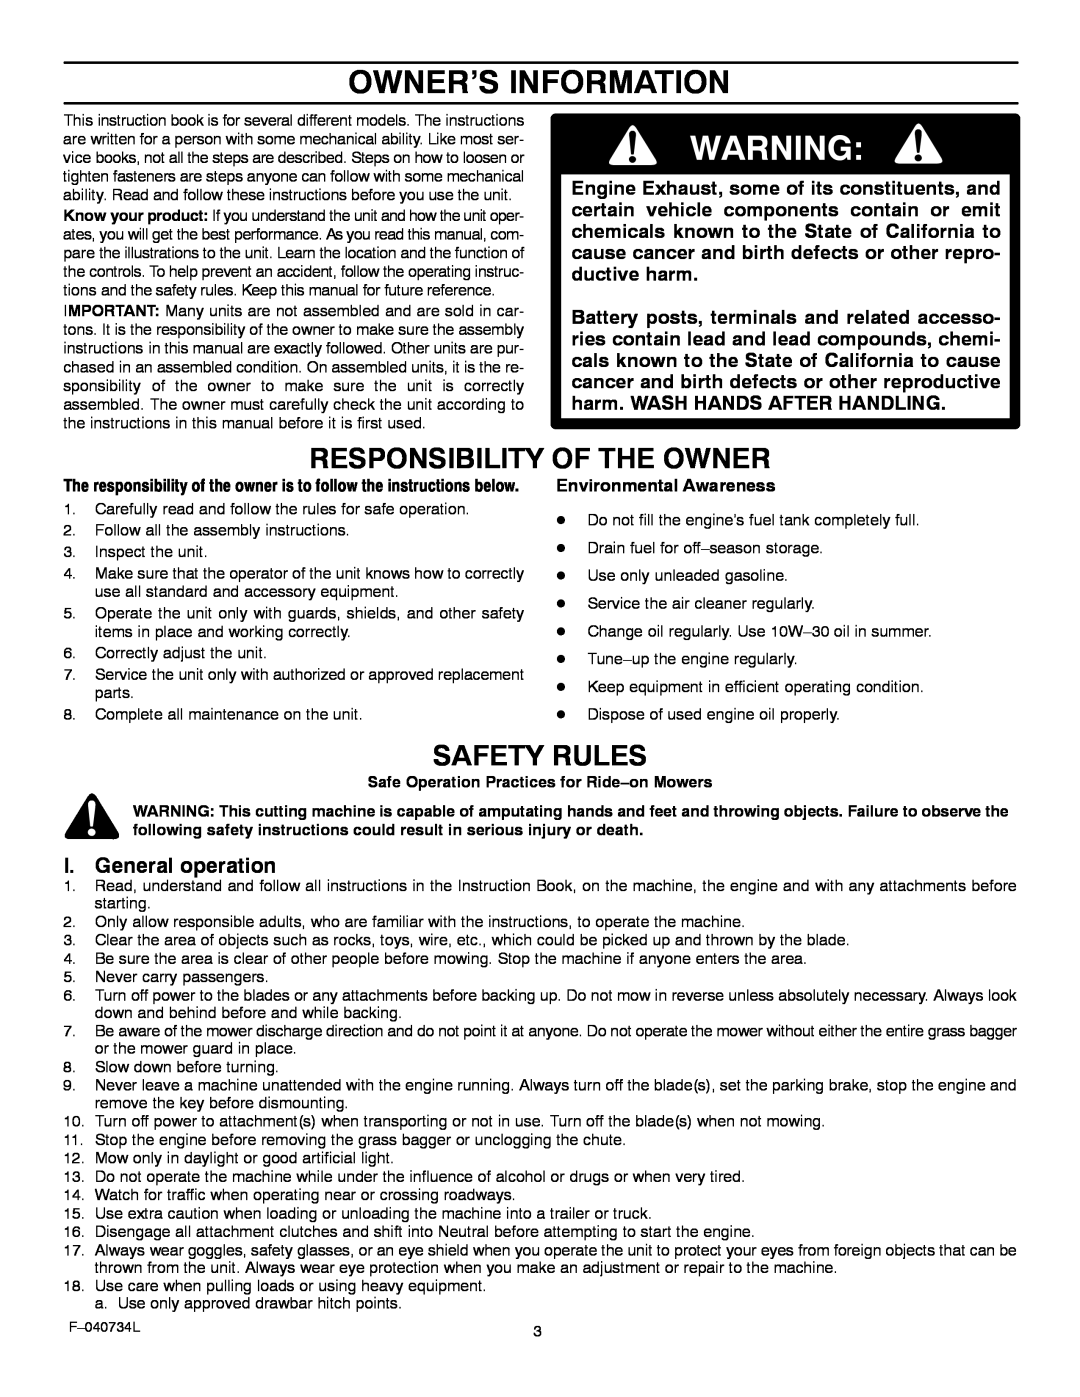 Murray 425015x92A manual Owner’S Information, Responsibility Of The Owner, Safety Rules, I. General operation 